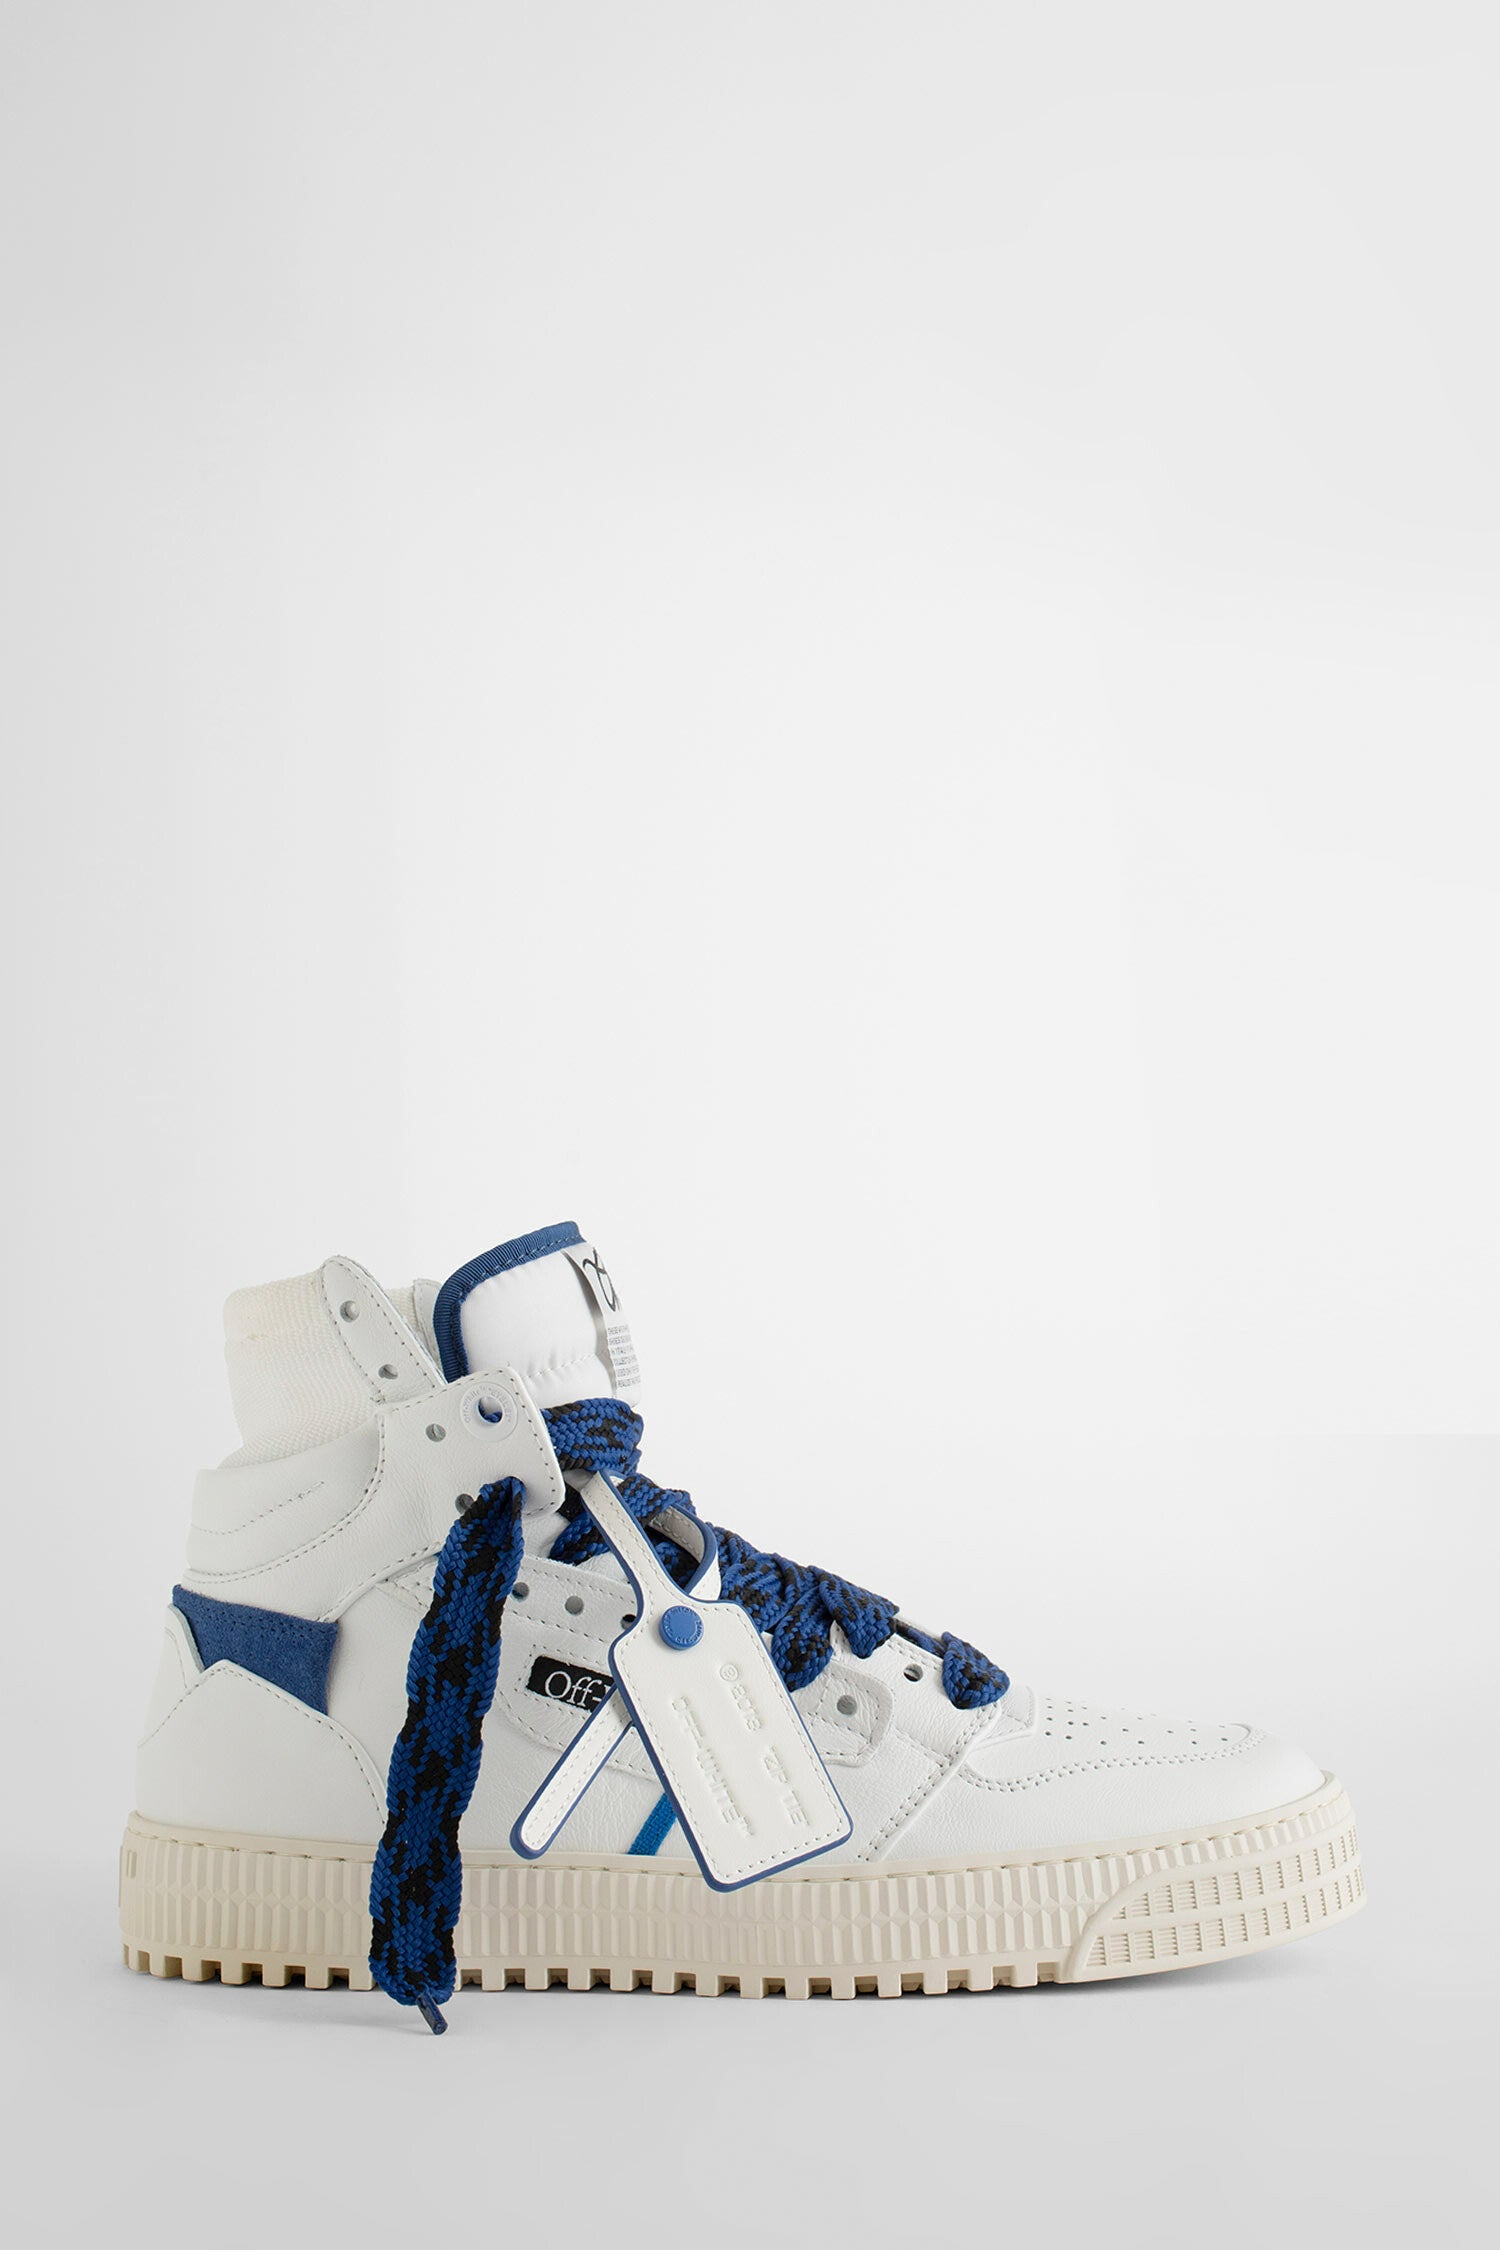 OFF-WHITE MAN MULTICOLOR SNEAKERS